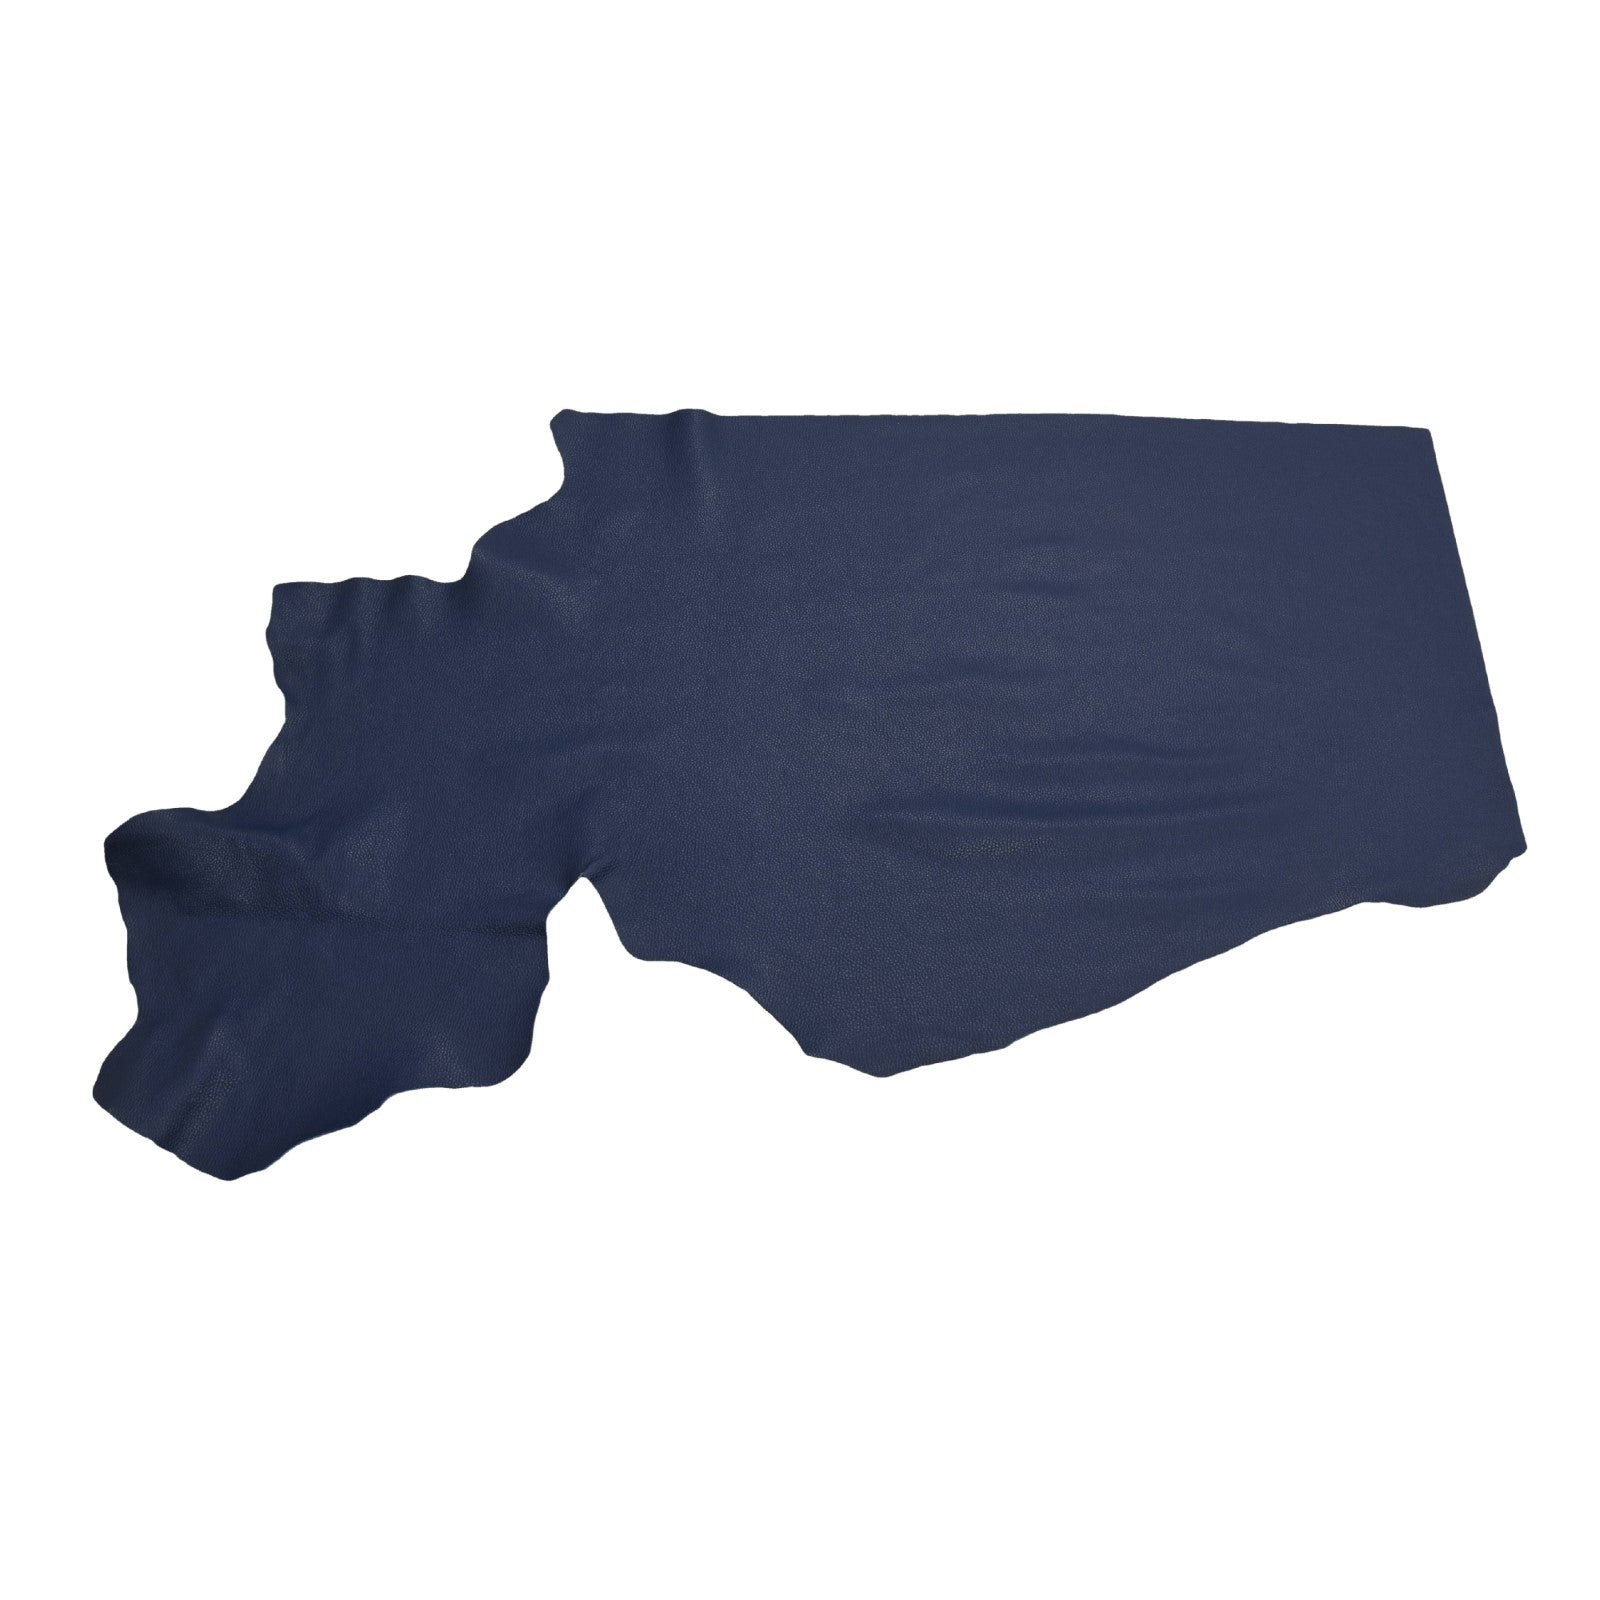 Naval Base Blue Tried n True 3-4 oz Leather Cow Hides, Bottom Piece / 6.5-7.5 Square Foot | The Leather Guy